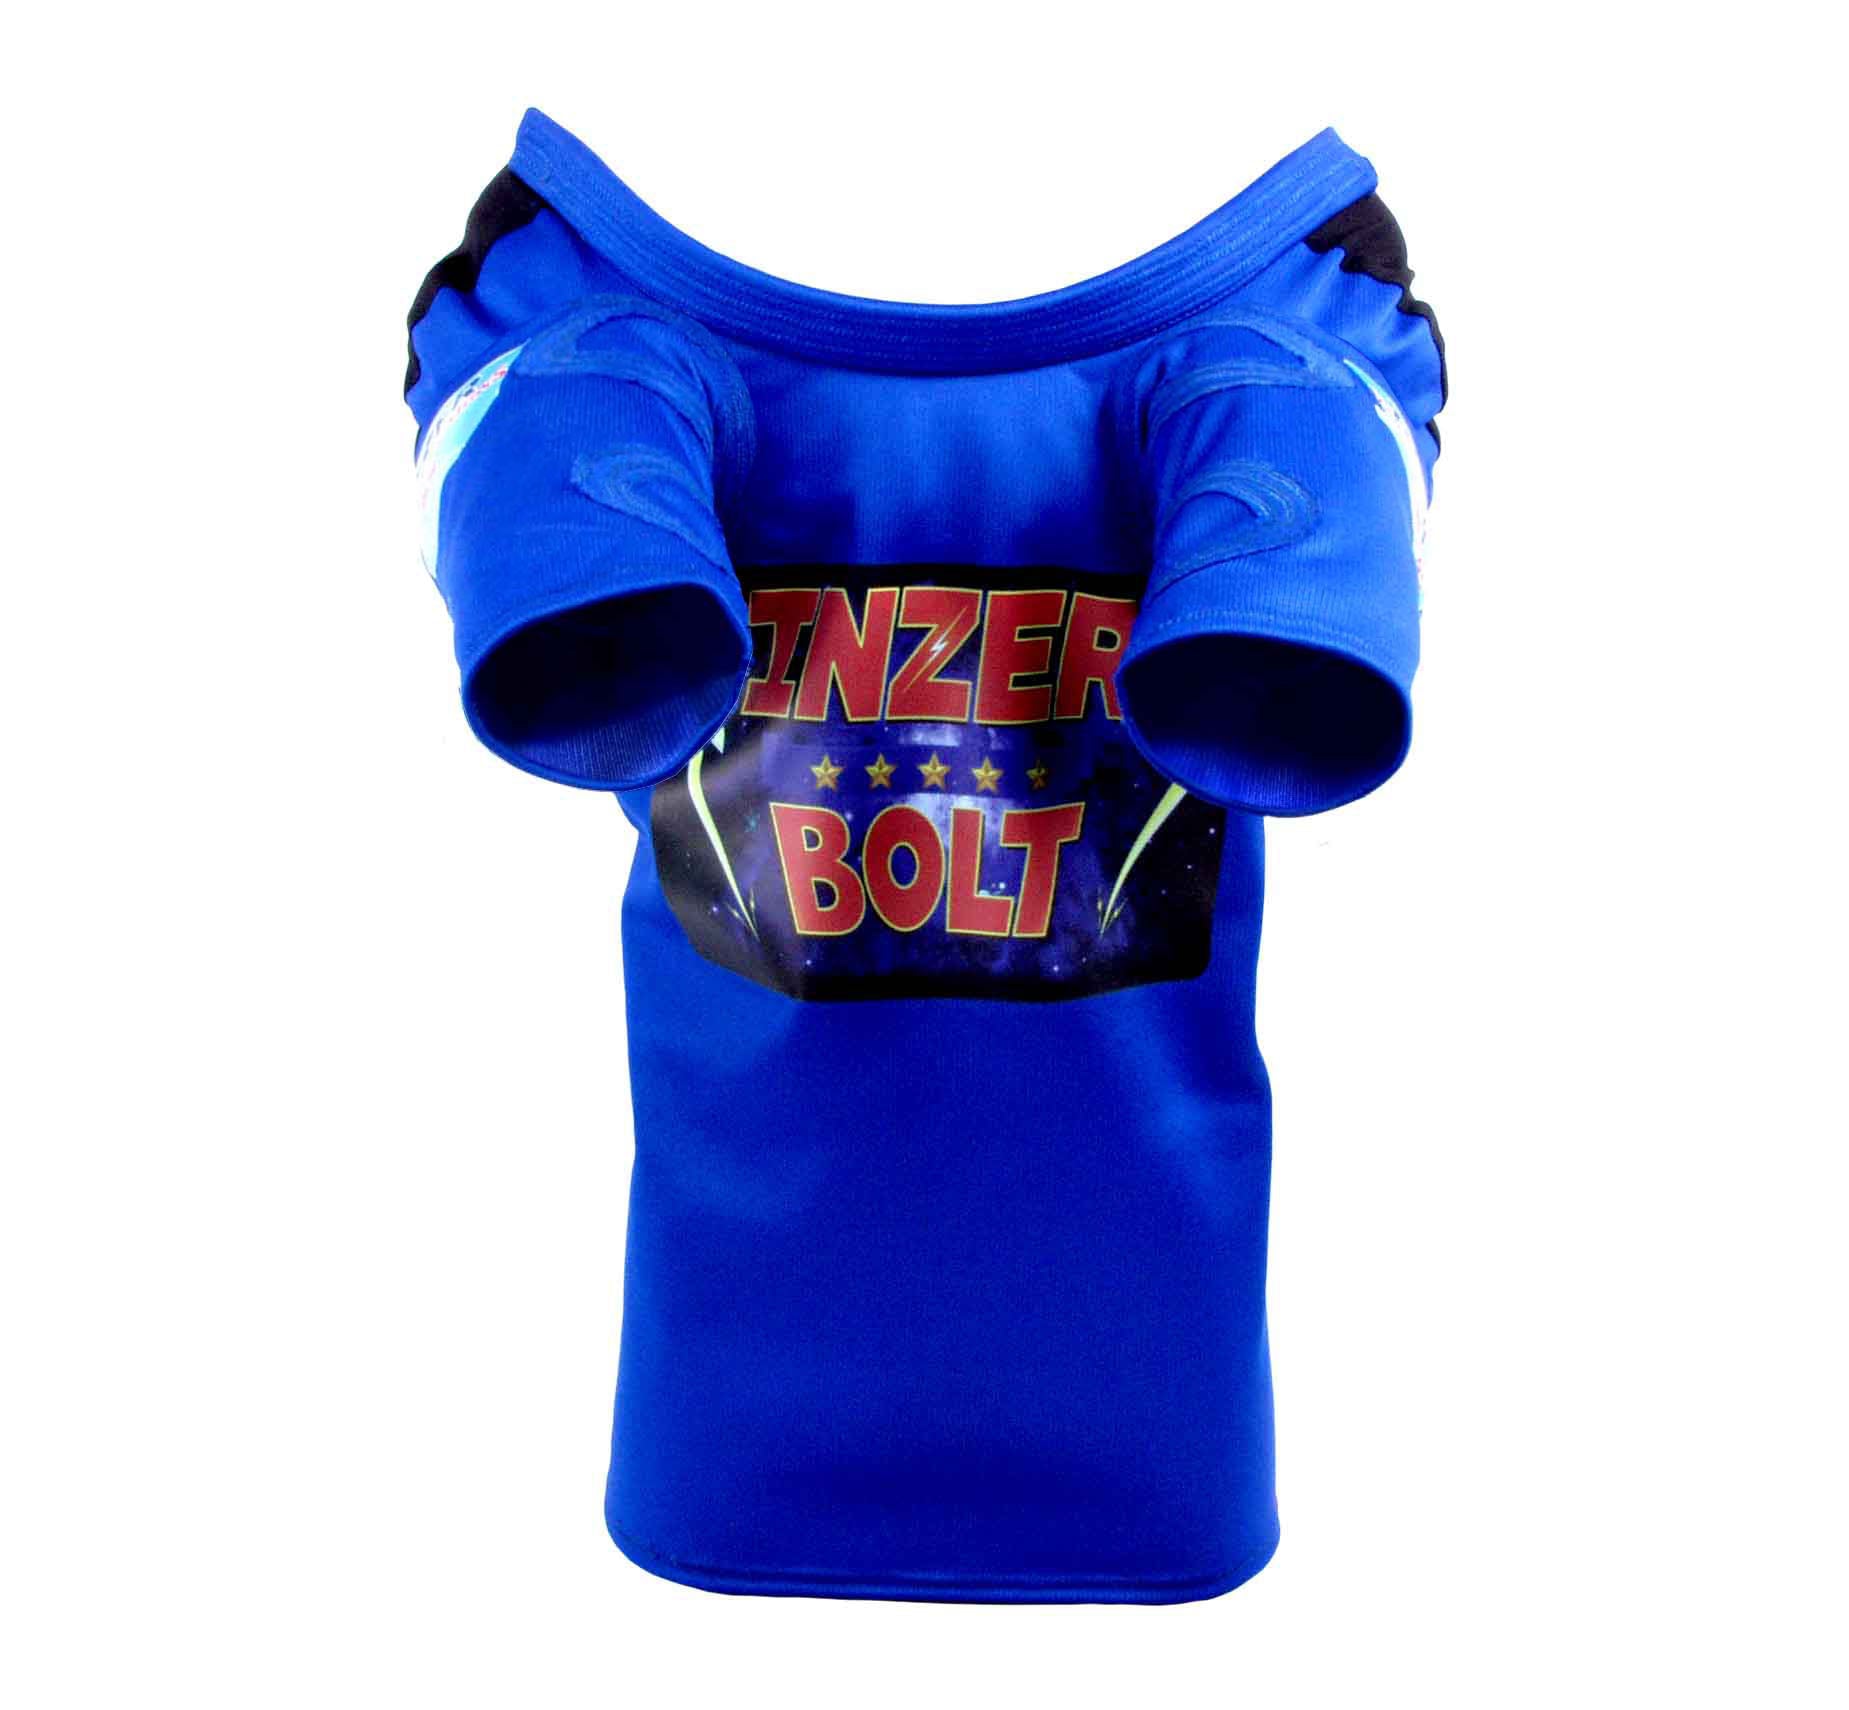 Bolt Bench Press Shirt The Best Performing Singleply Bench Press